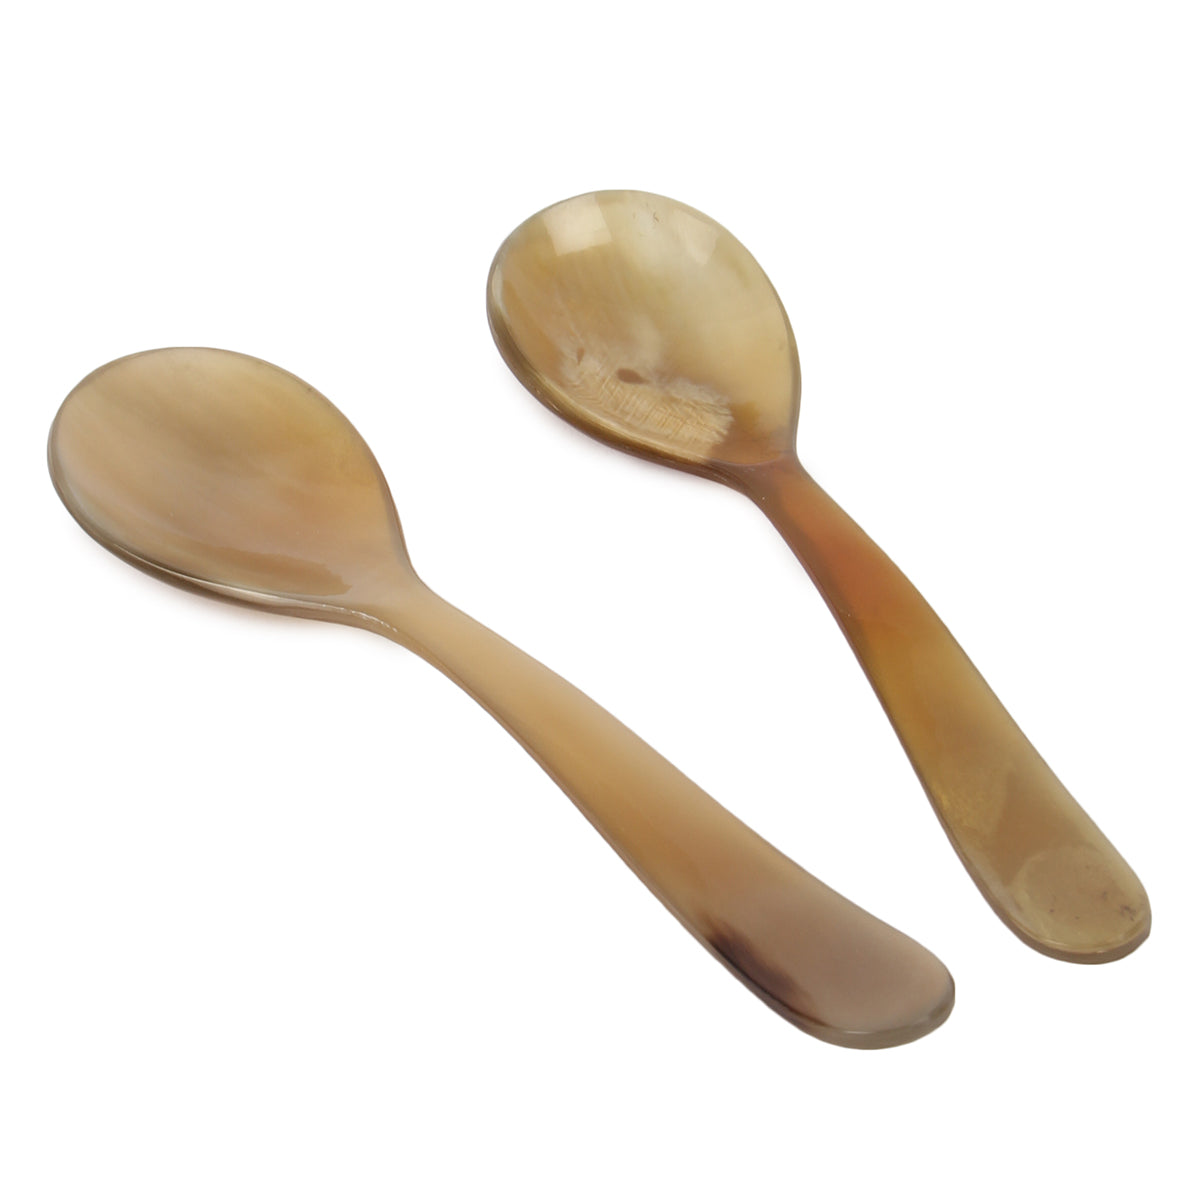 Tablespoon in horn